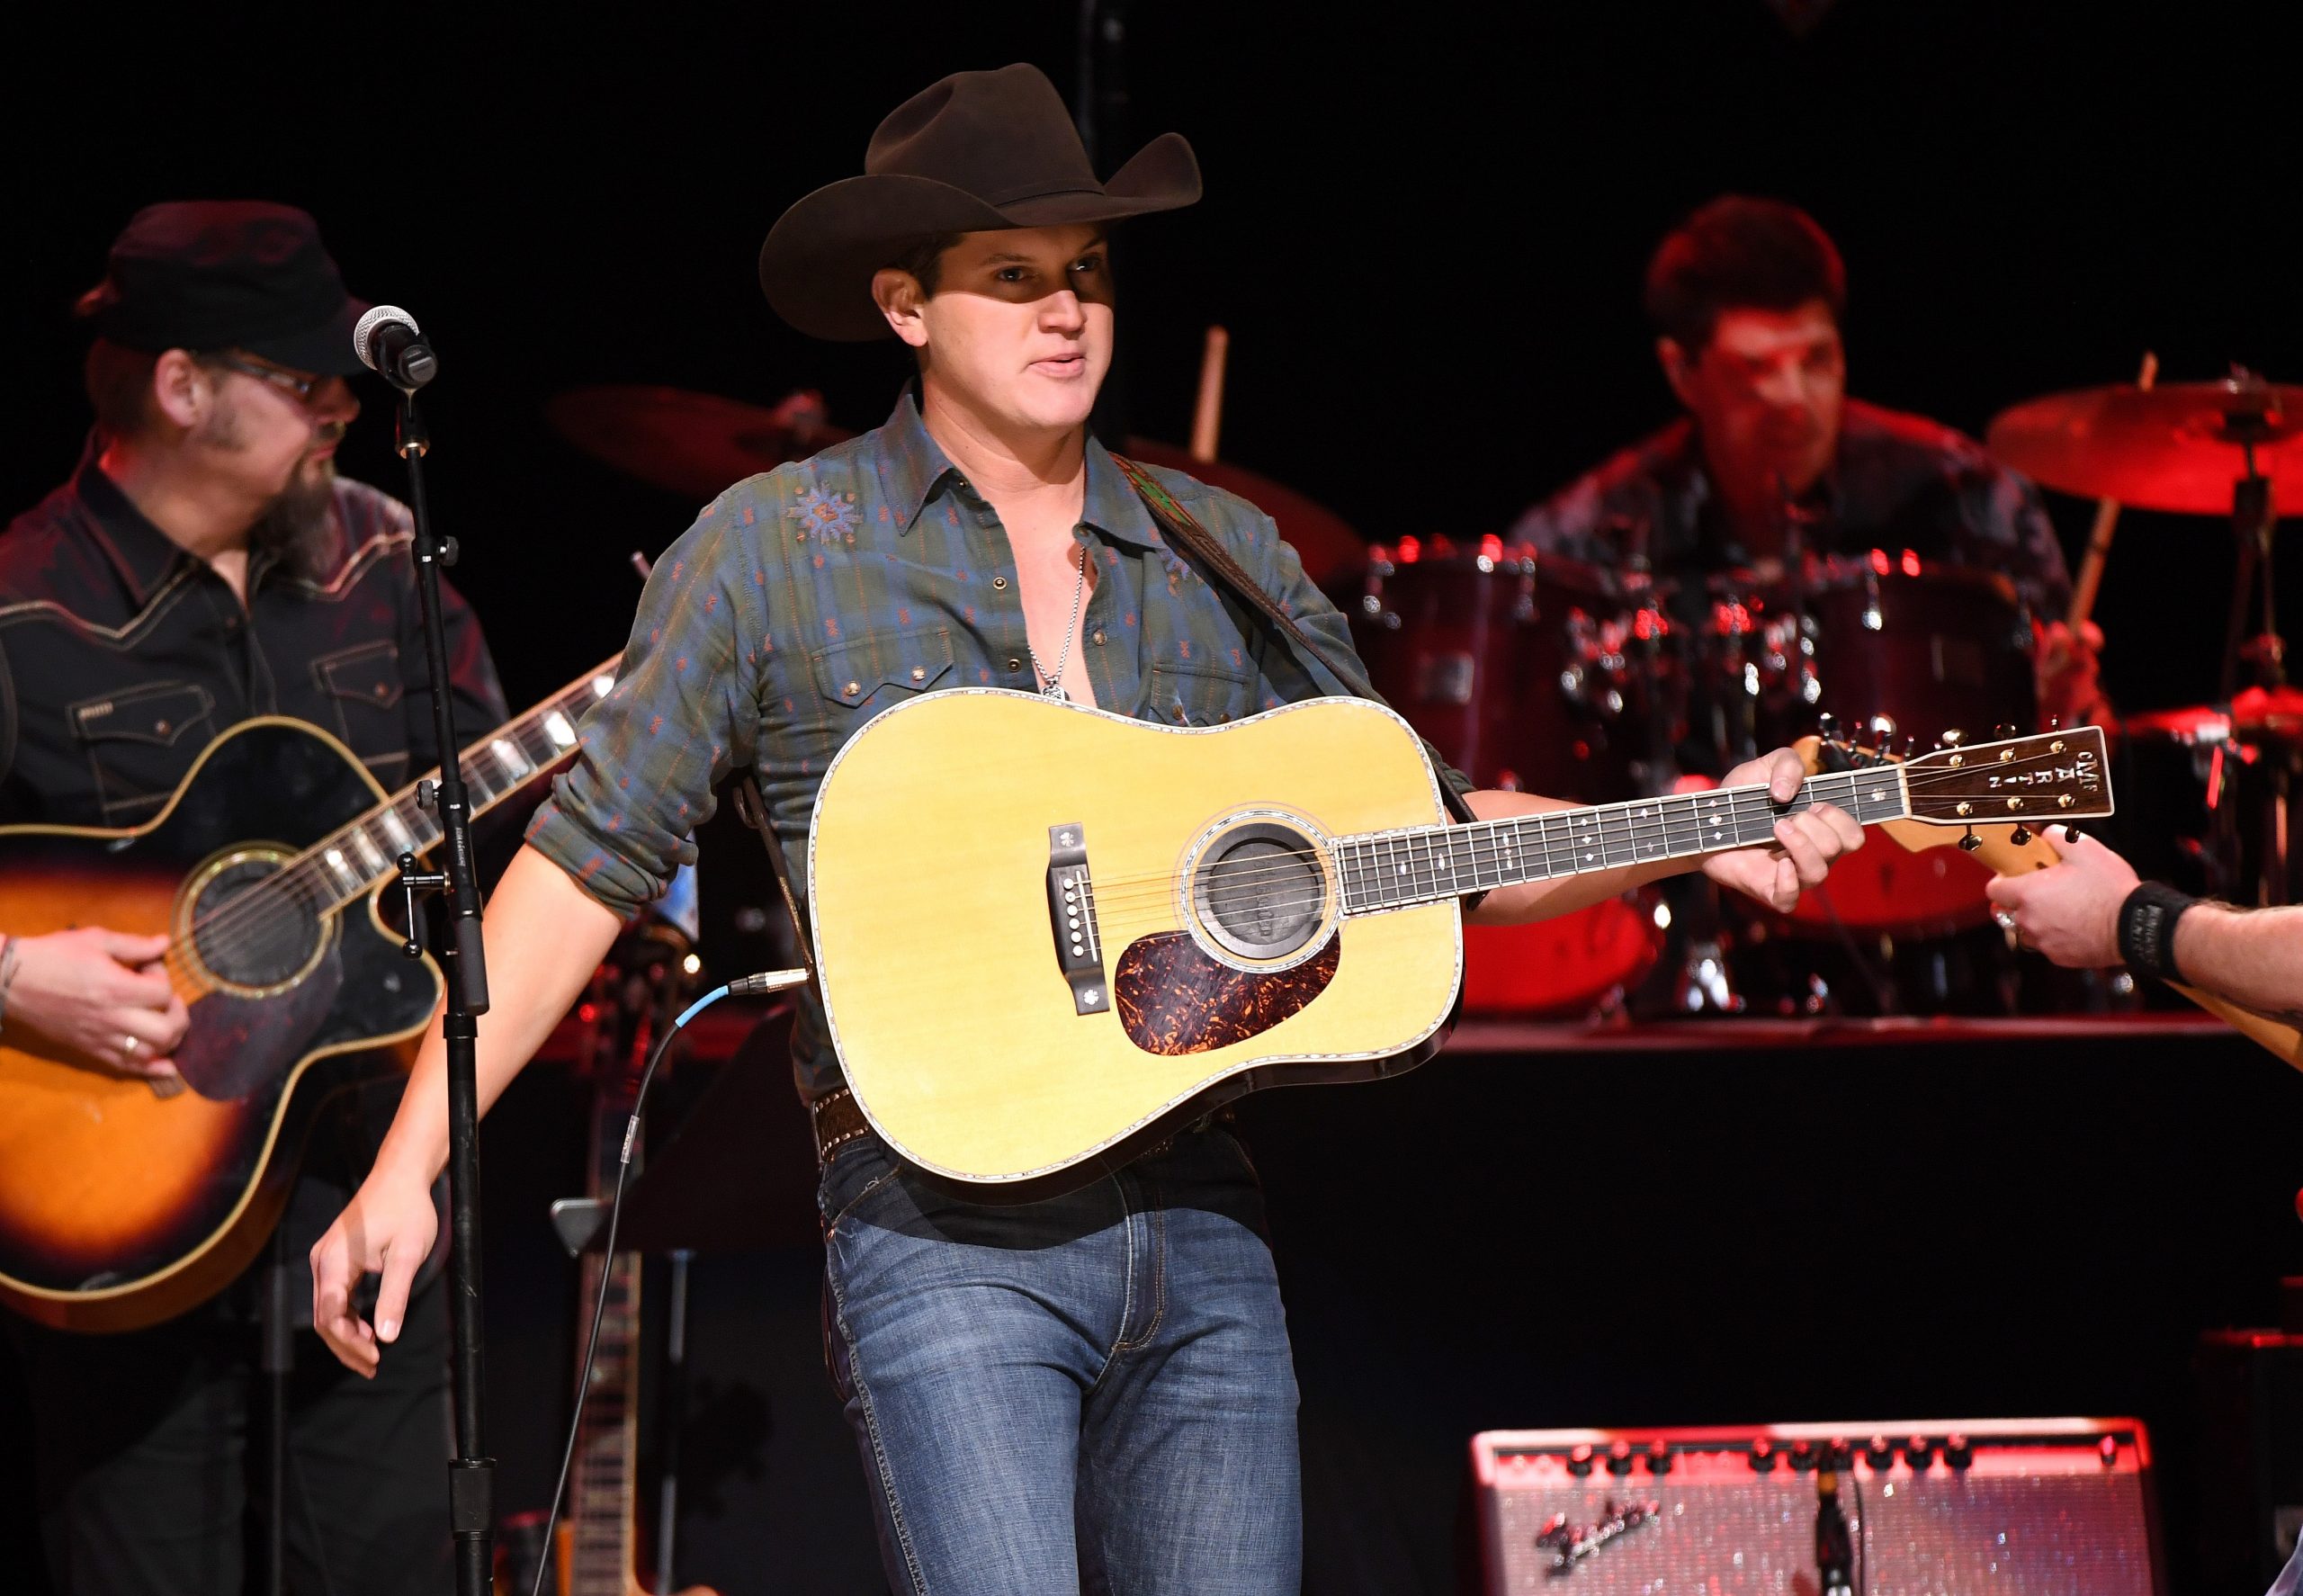 Jon Pardi Attributes His Great Love For Country Music to Grandma Sounds